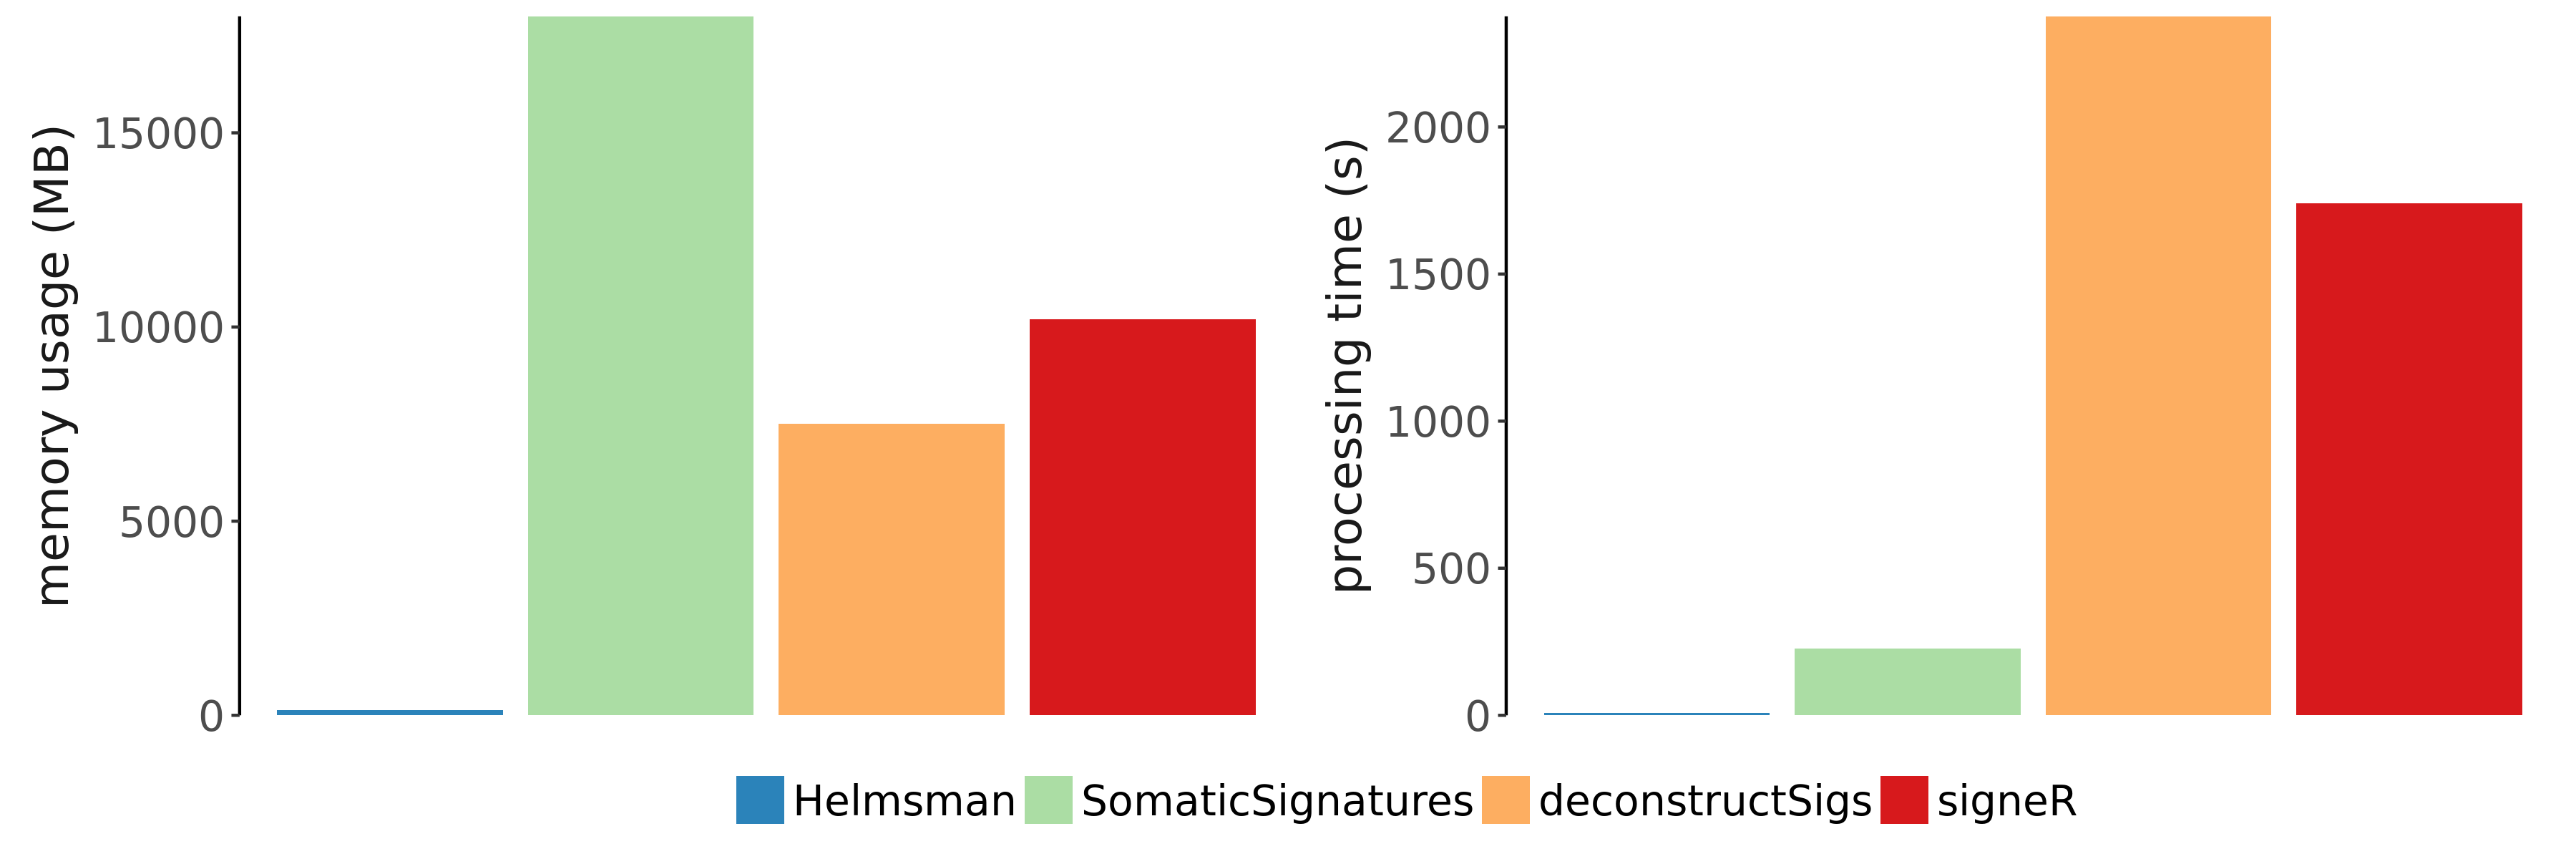 Helmsman is orders of magnitude faster and more memory efficient than competing mutation signature analysis tools